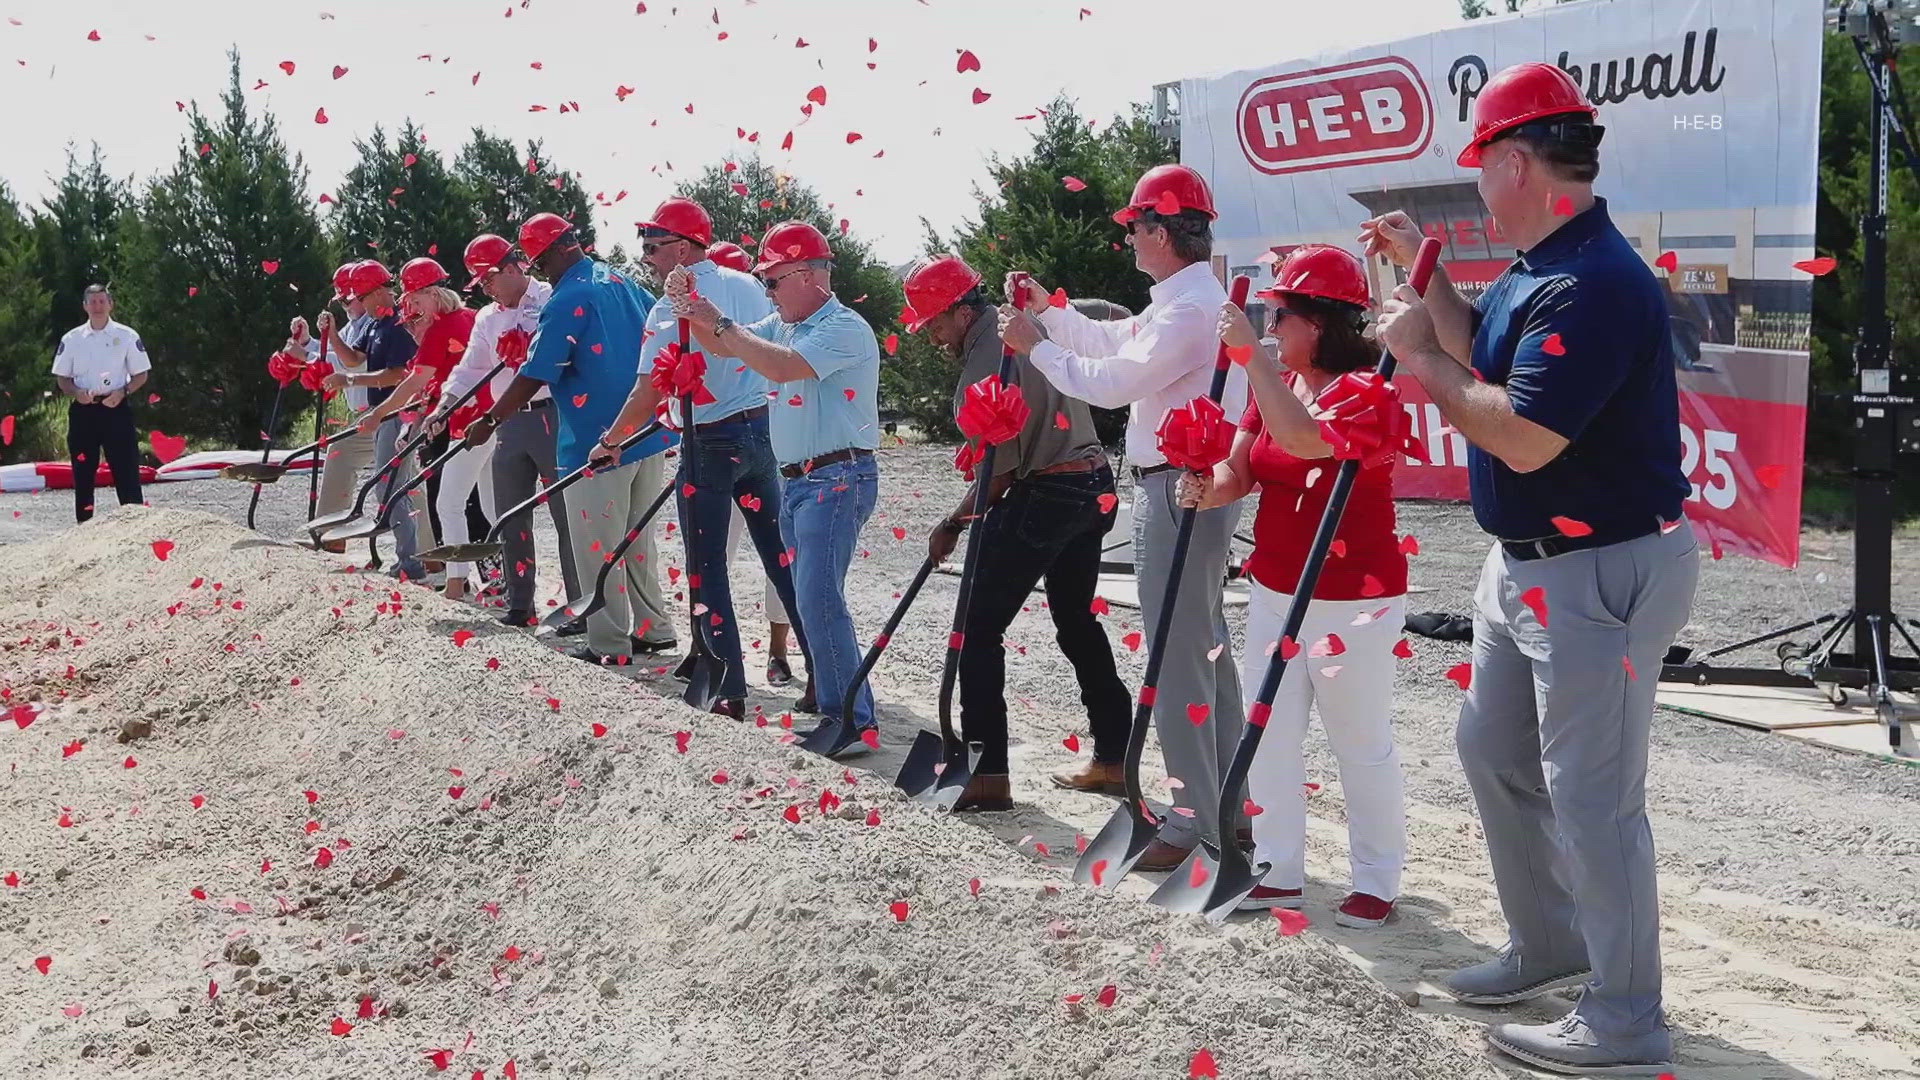 Thursday, the grocer broke ground on a new location in Rockwall.